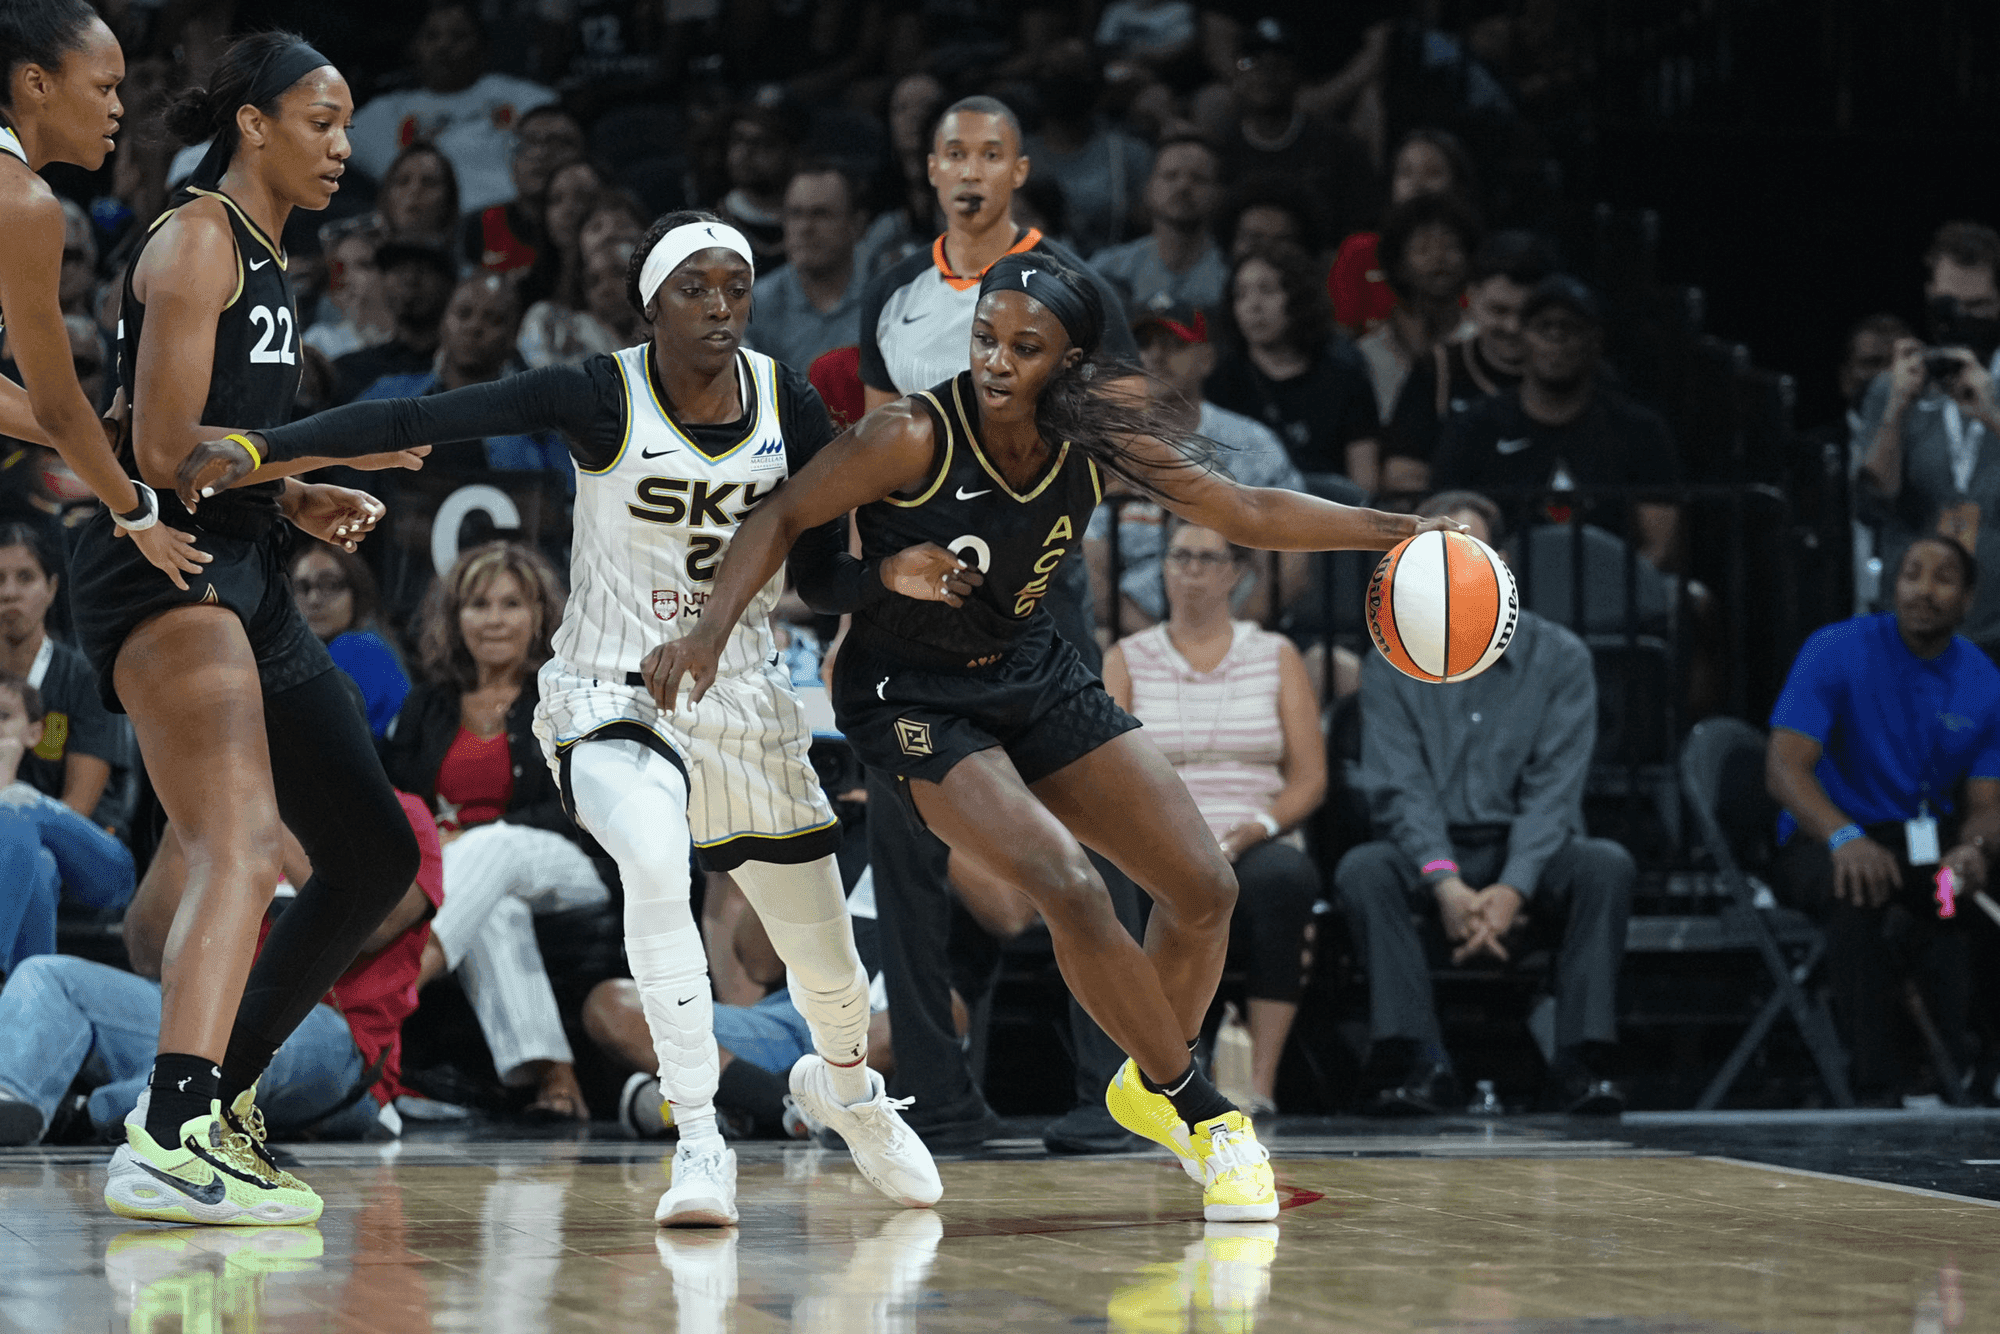 Chicago Sky vs Las Vegas Aces Prediction, Odds & Best Bets: Let the playoffs begin!